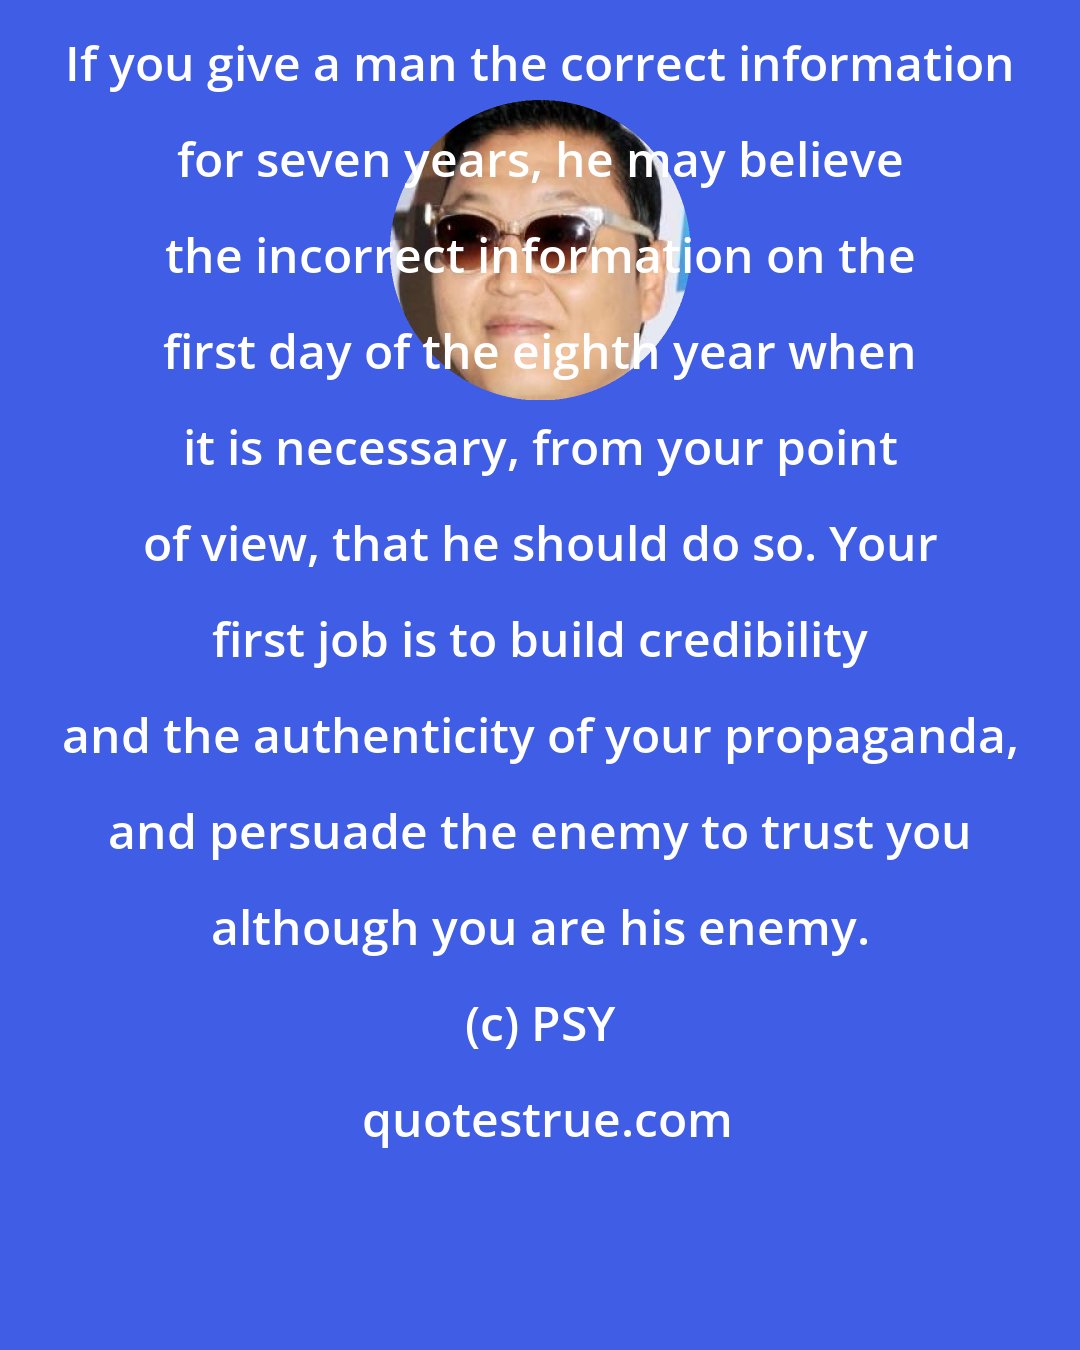 PSY: If you give a man the correct information for seven years, he may believe the incorrect information on the first day of the eighth year when it is necessary, from your point of view, that he should do so. Your first job is to build credibility and the authenticity of your propaganda, and persuade the enemy to trust you although you are his enemy.